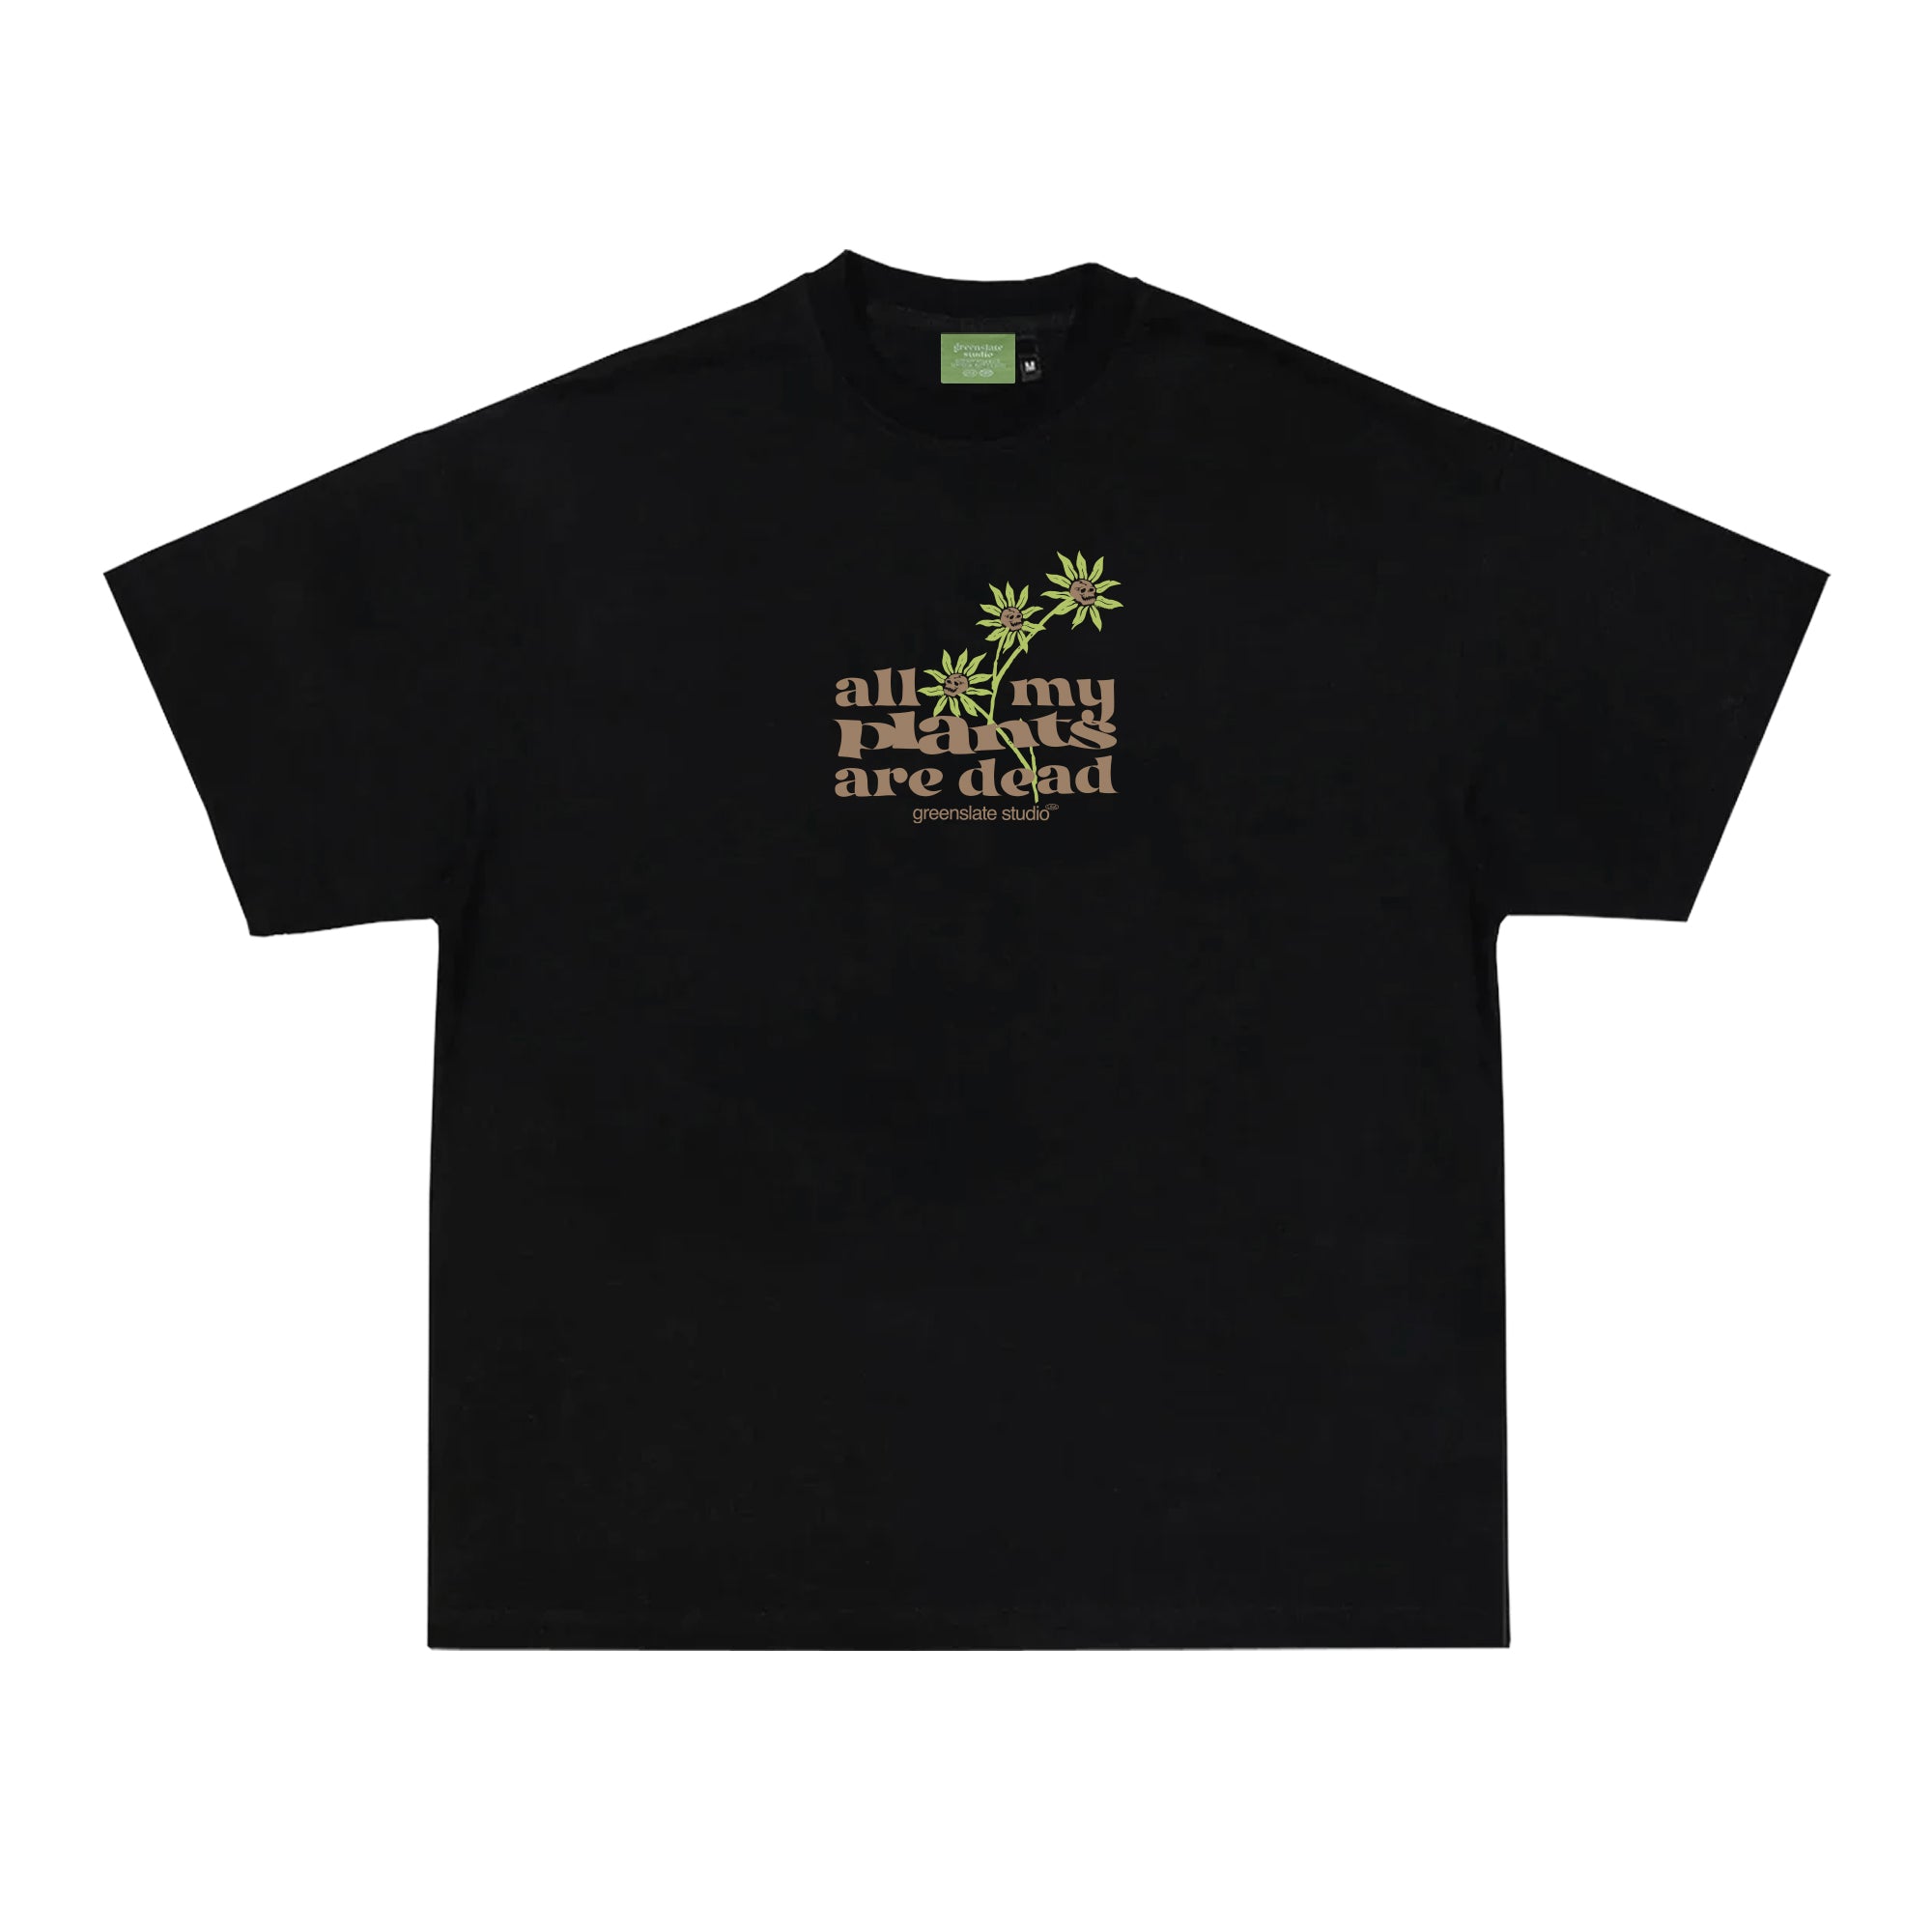 "All My Plants Are Dead" Tee - Black